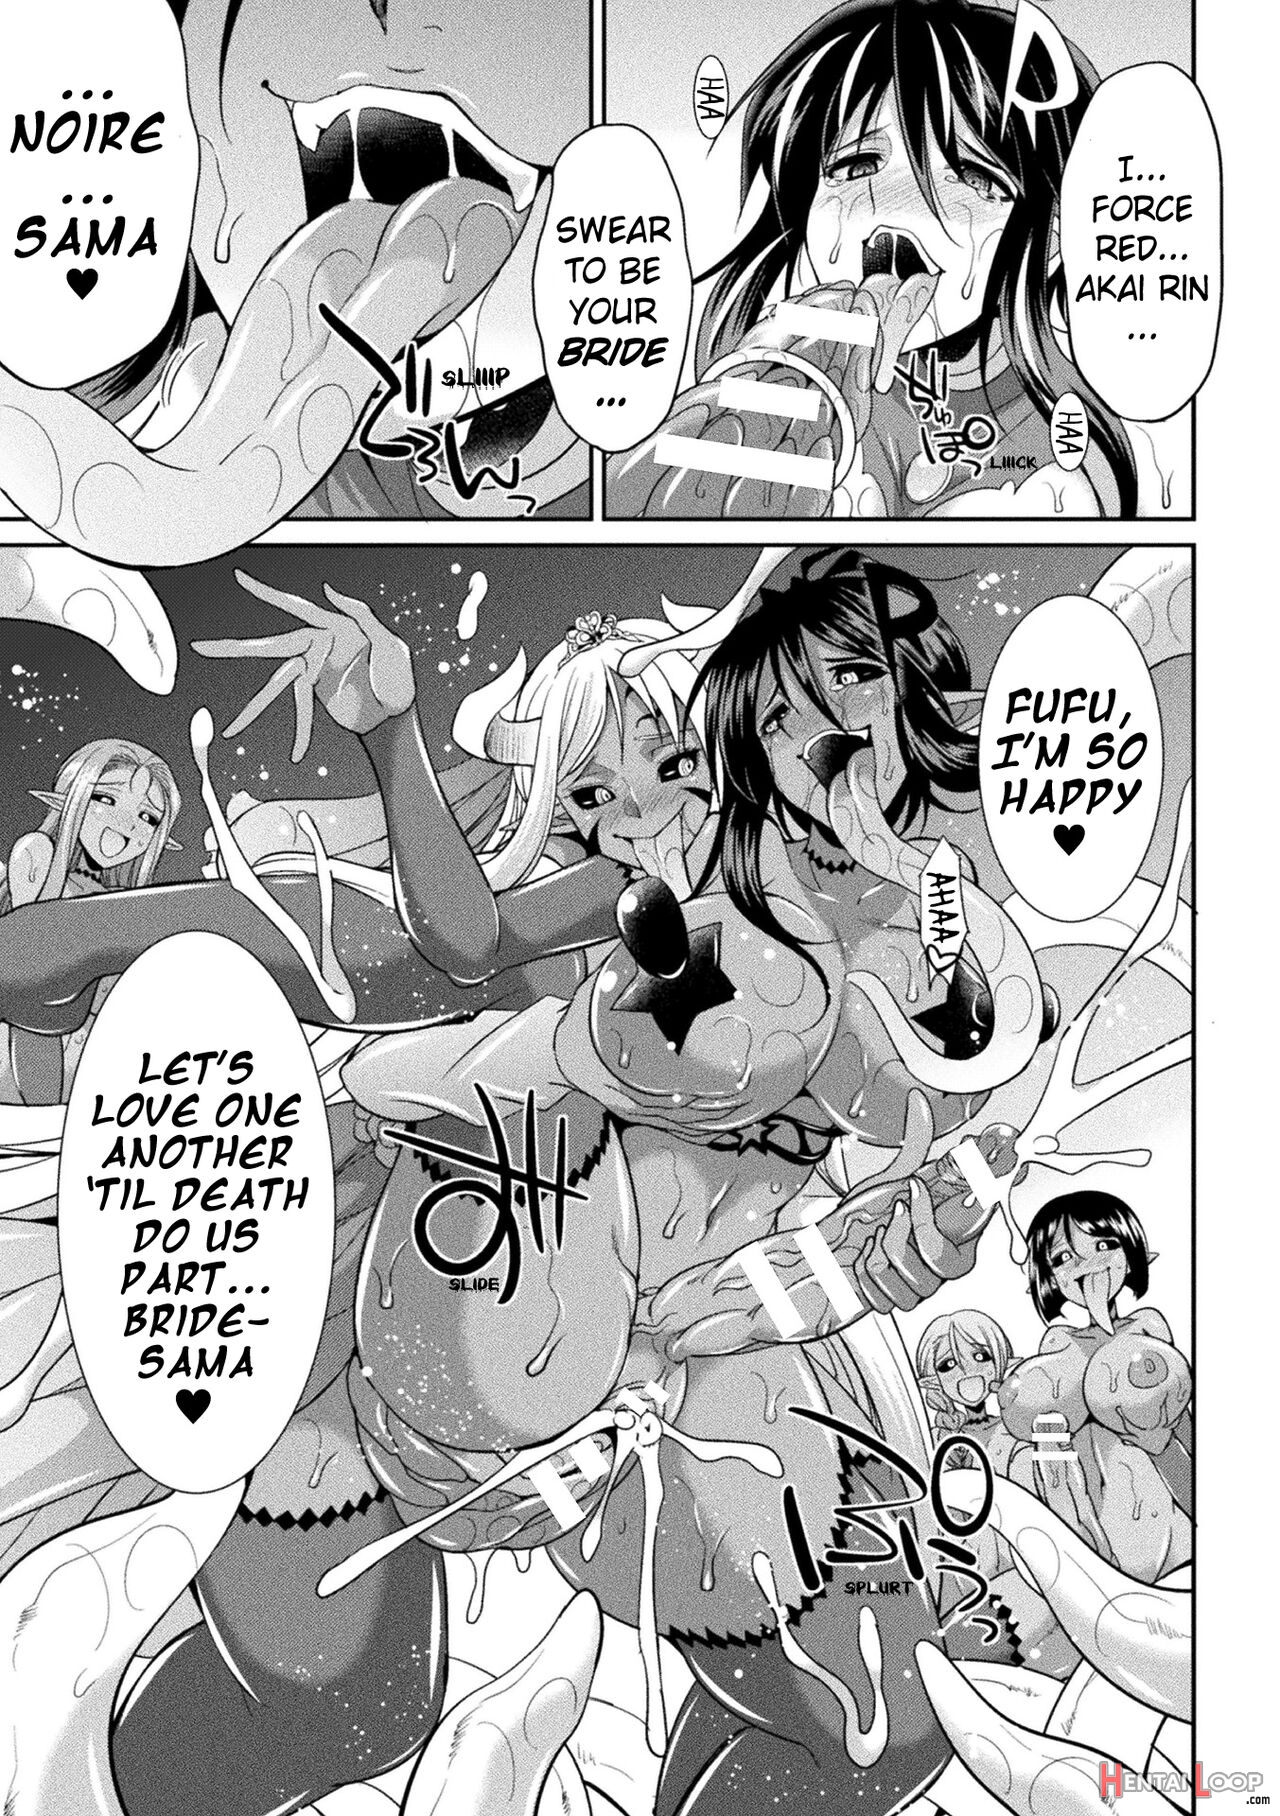 Special Duty Squadron Colorful Force Heroines Of Justice Vs The Tentacle Queen! The Great Battle Of Futa Training!? page 159